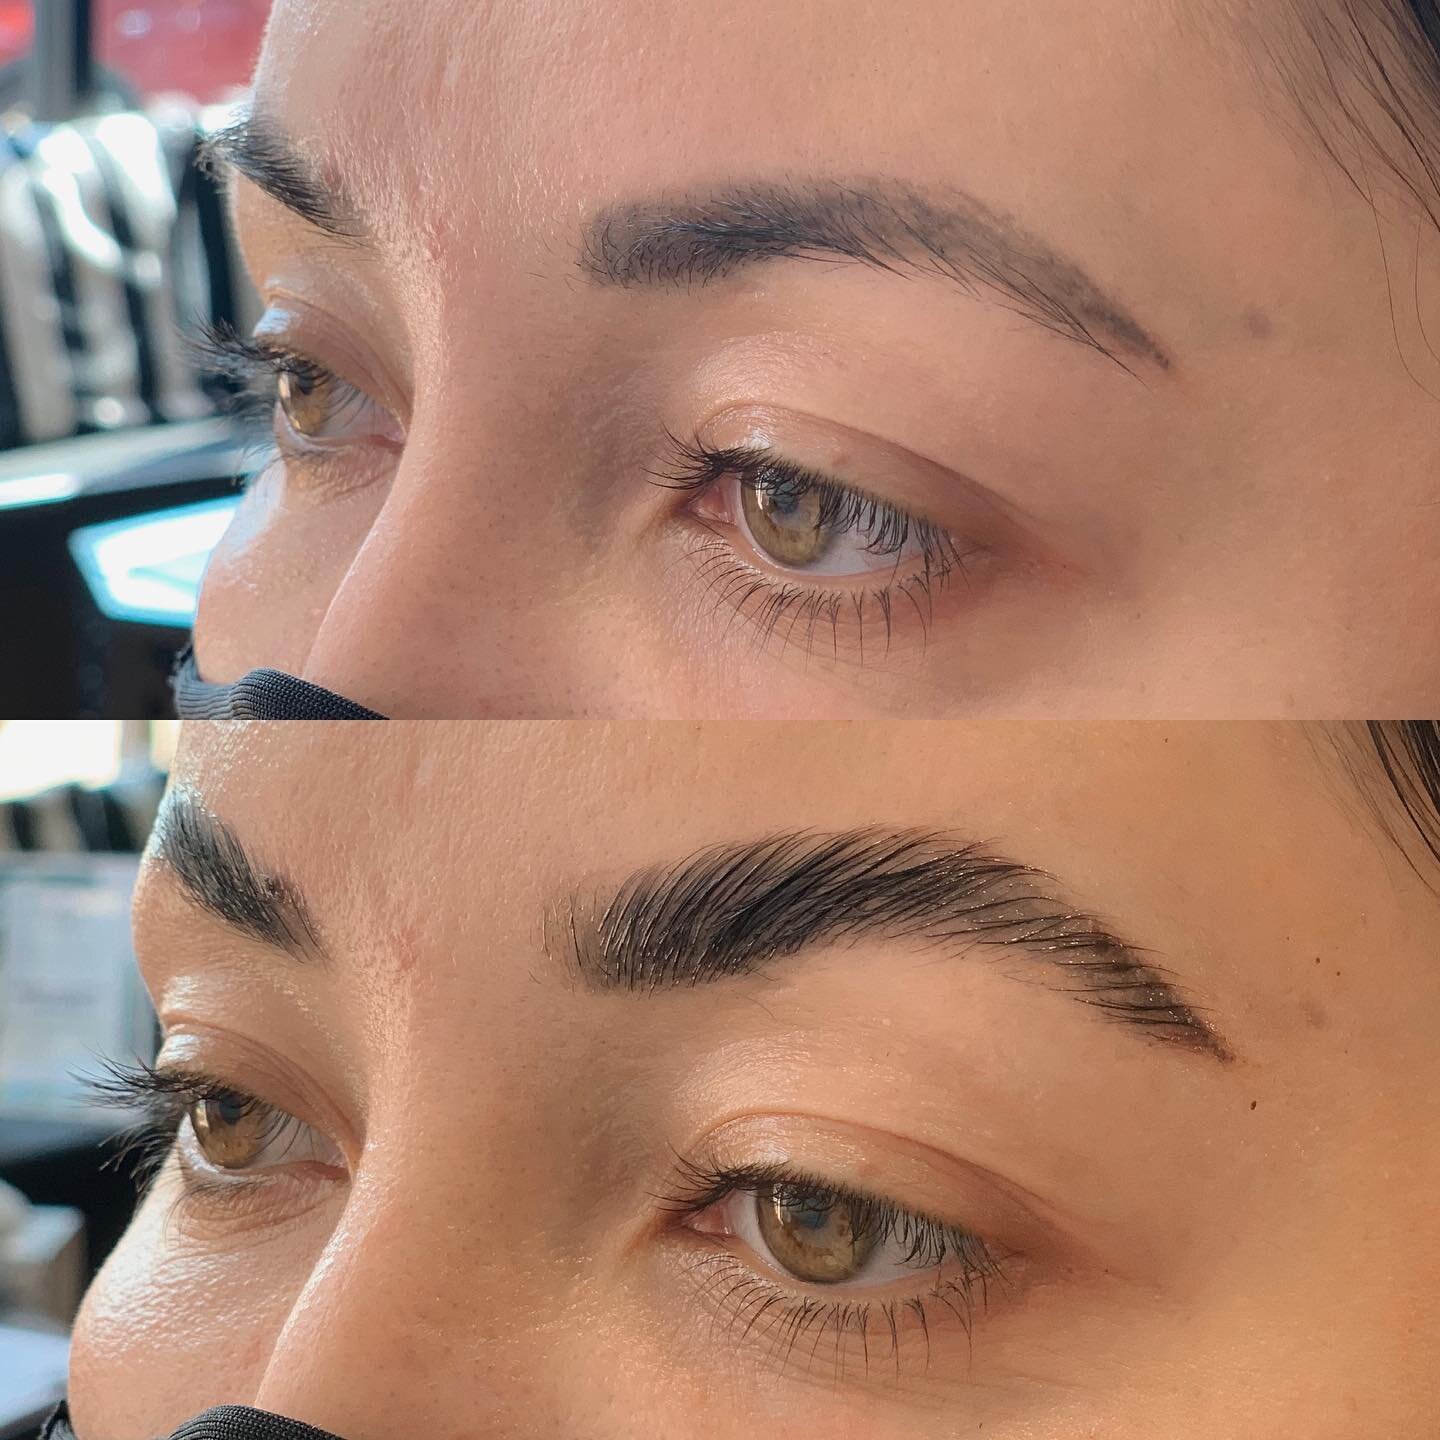 Does your microblading need a boost? 💁🏻&zwj;♀️ Try a Brow Lamination +Tint! 💫
.
.
DM or call 773-857-3525 to book!
.
.

#brows #browlamination #chicagobrows #browartist #browlift #fluffybrows #boybrow #nowopen #fixhairstudio #nowtrending #microbla